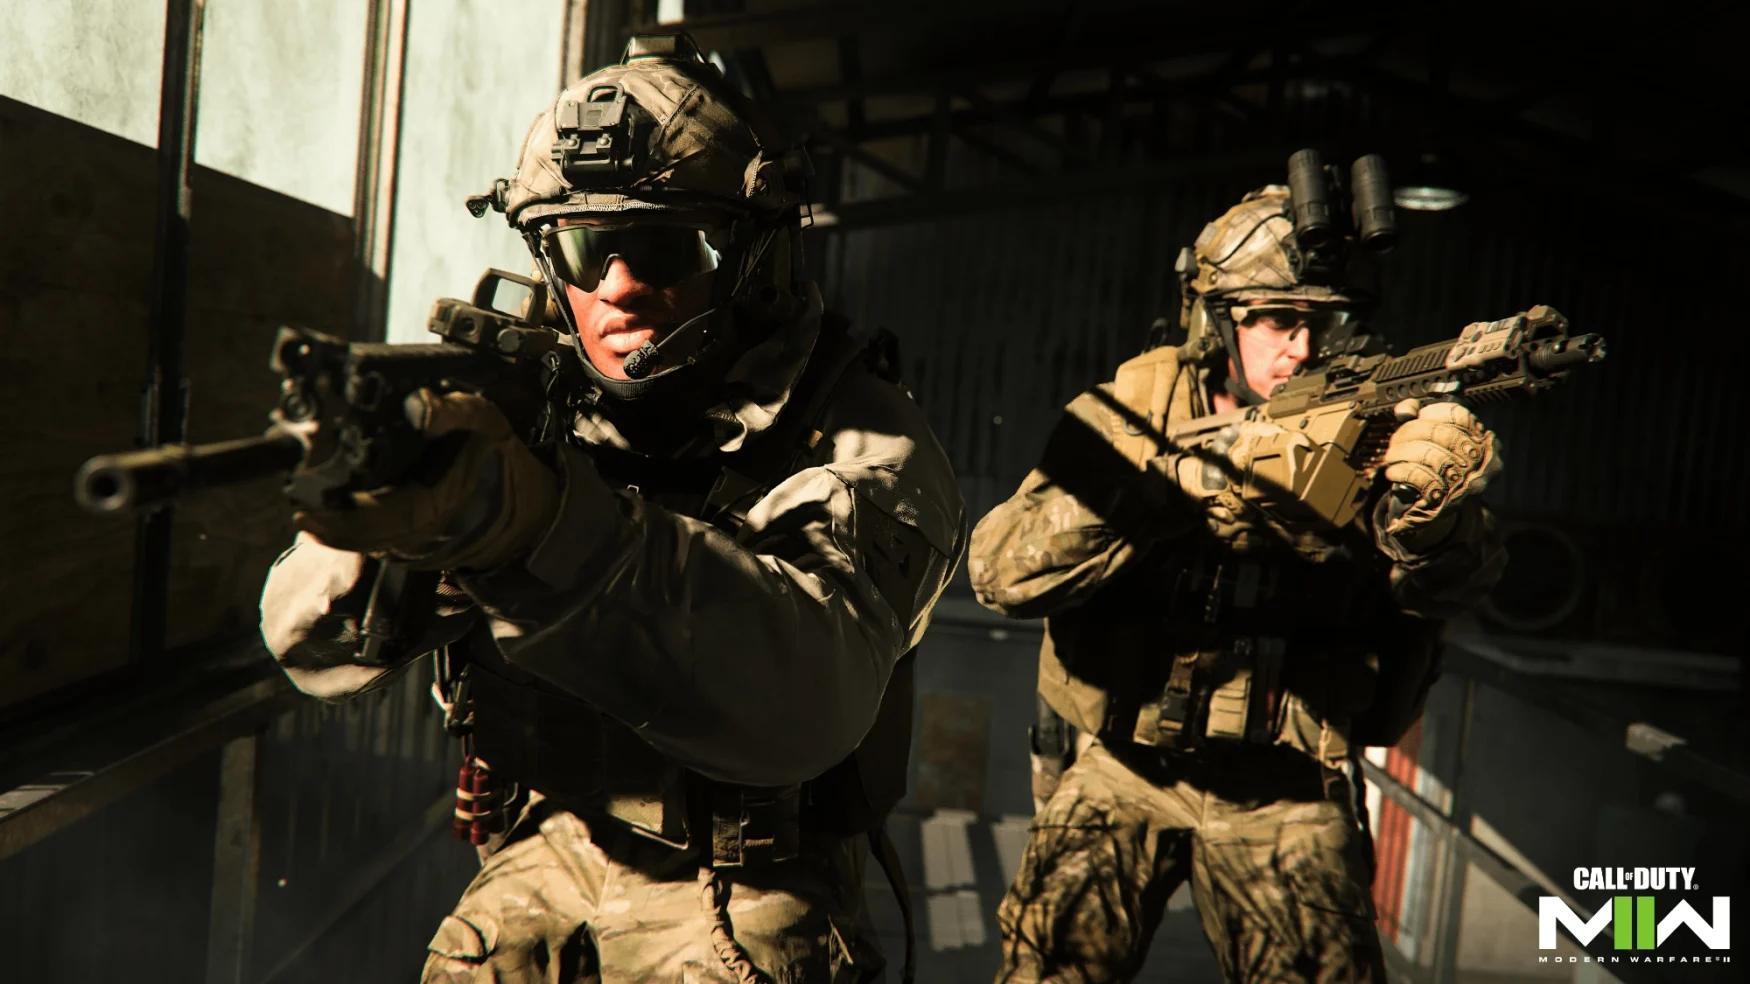 Screenshot from Call of Duty: Modern Warfare, showing two soldiers pointing their combat rifles to the left and right of the camera